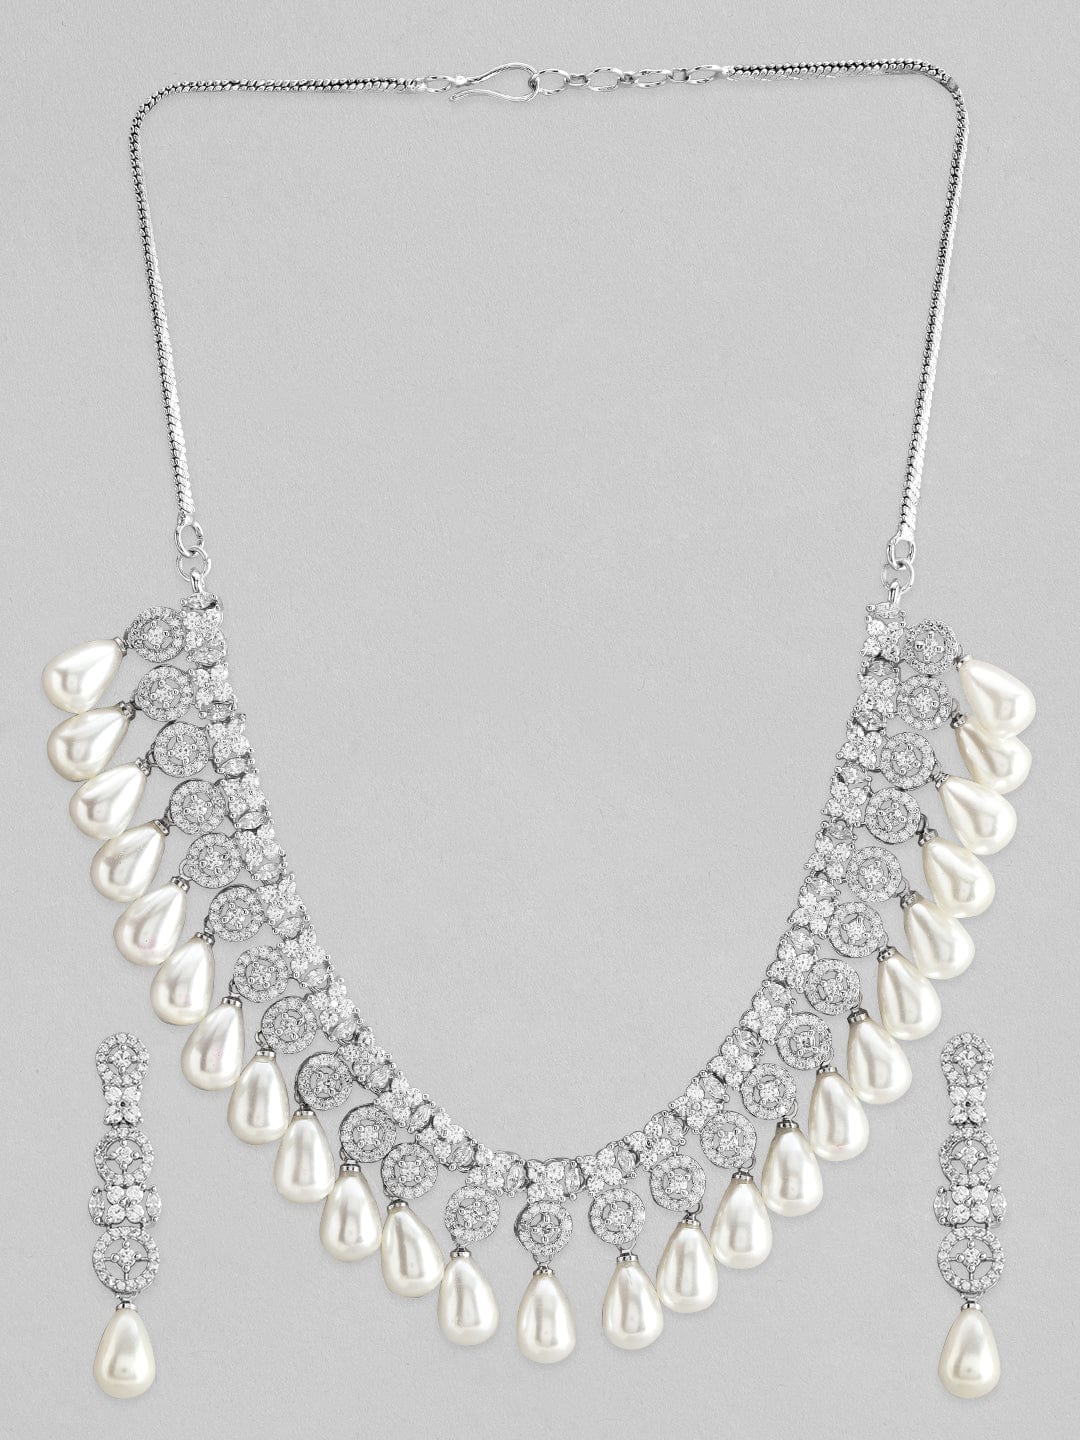 Rubans Silver Plated Necklace Set With American Diamonds And Pearls. Necklace Set